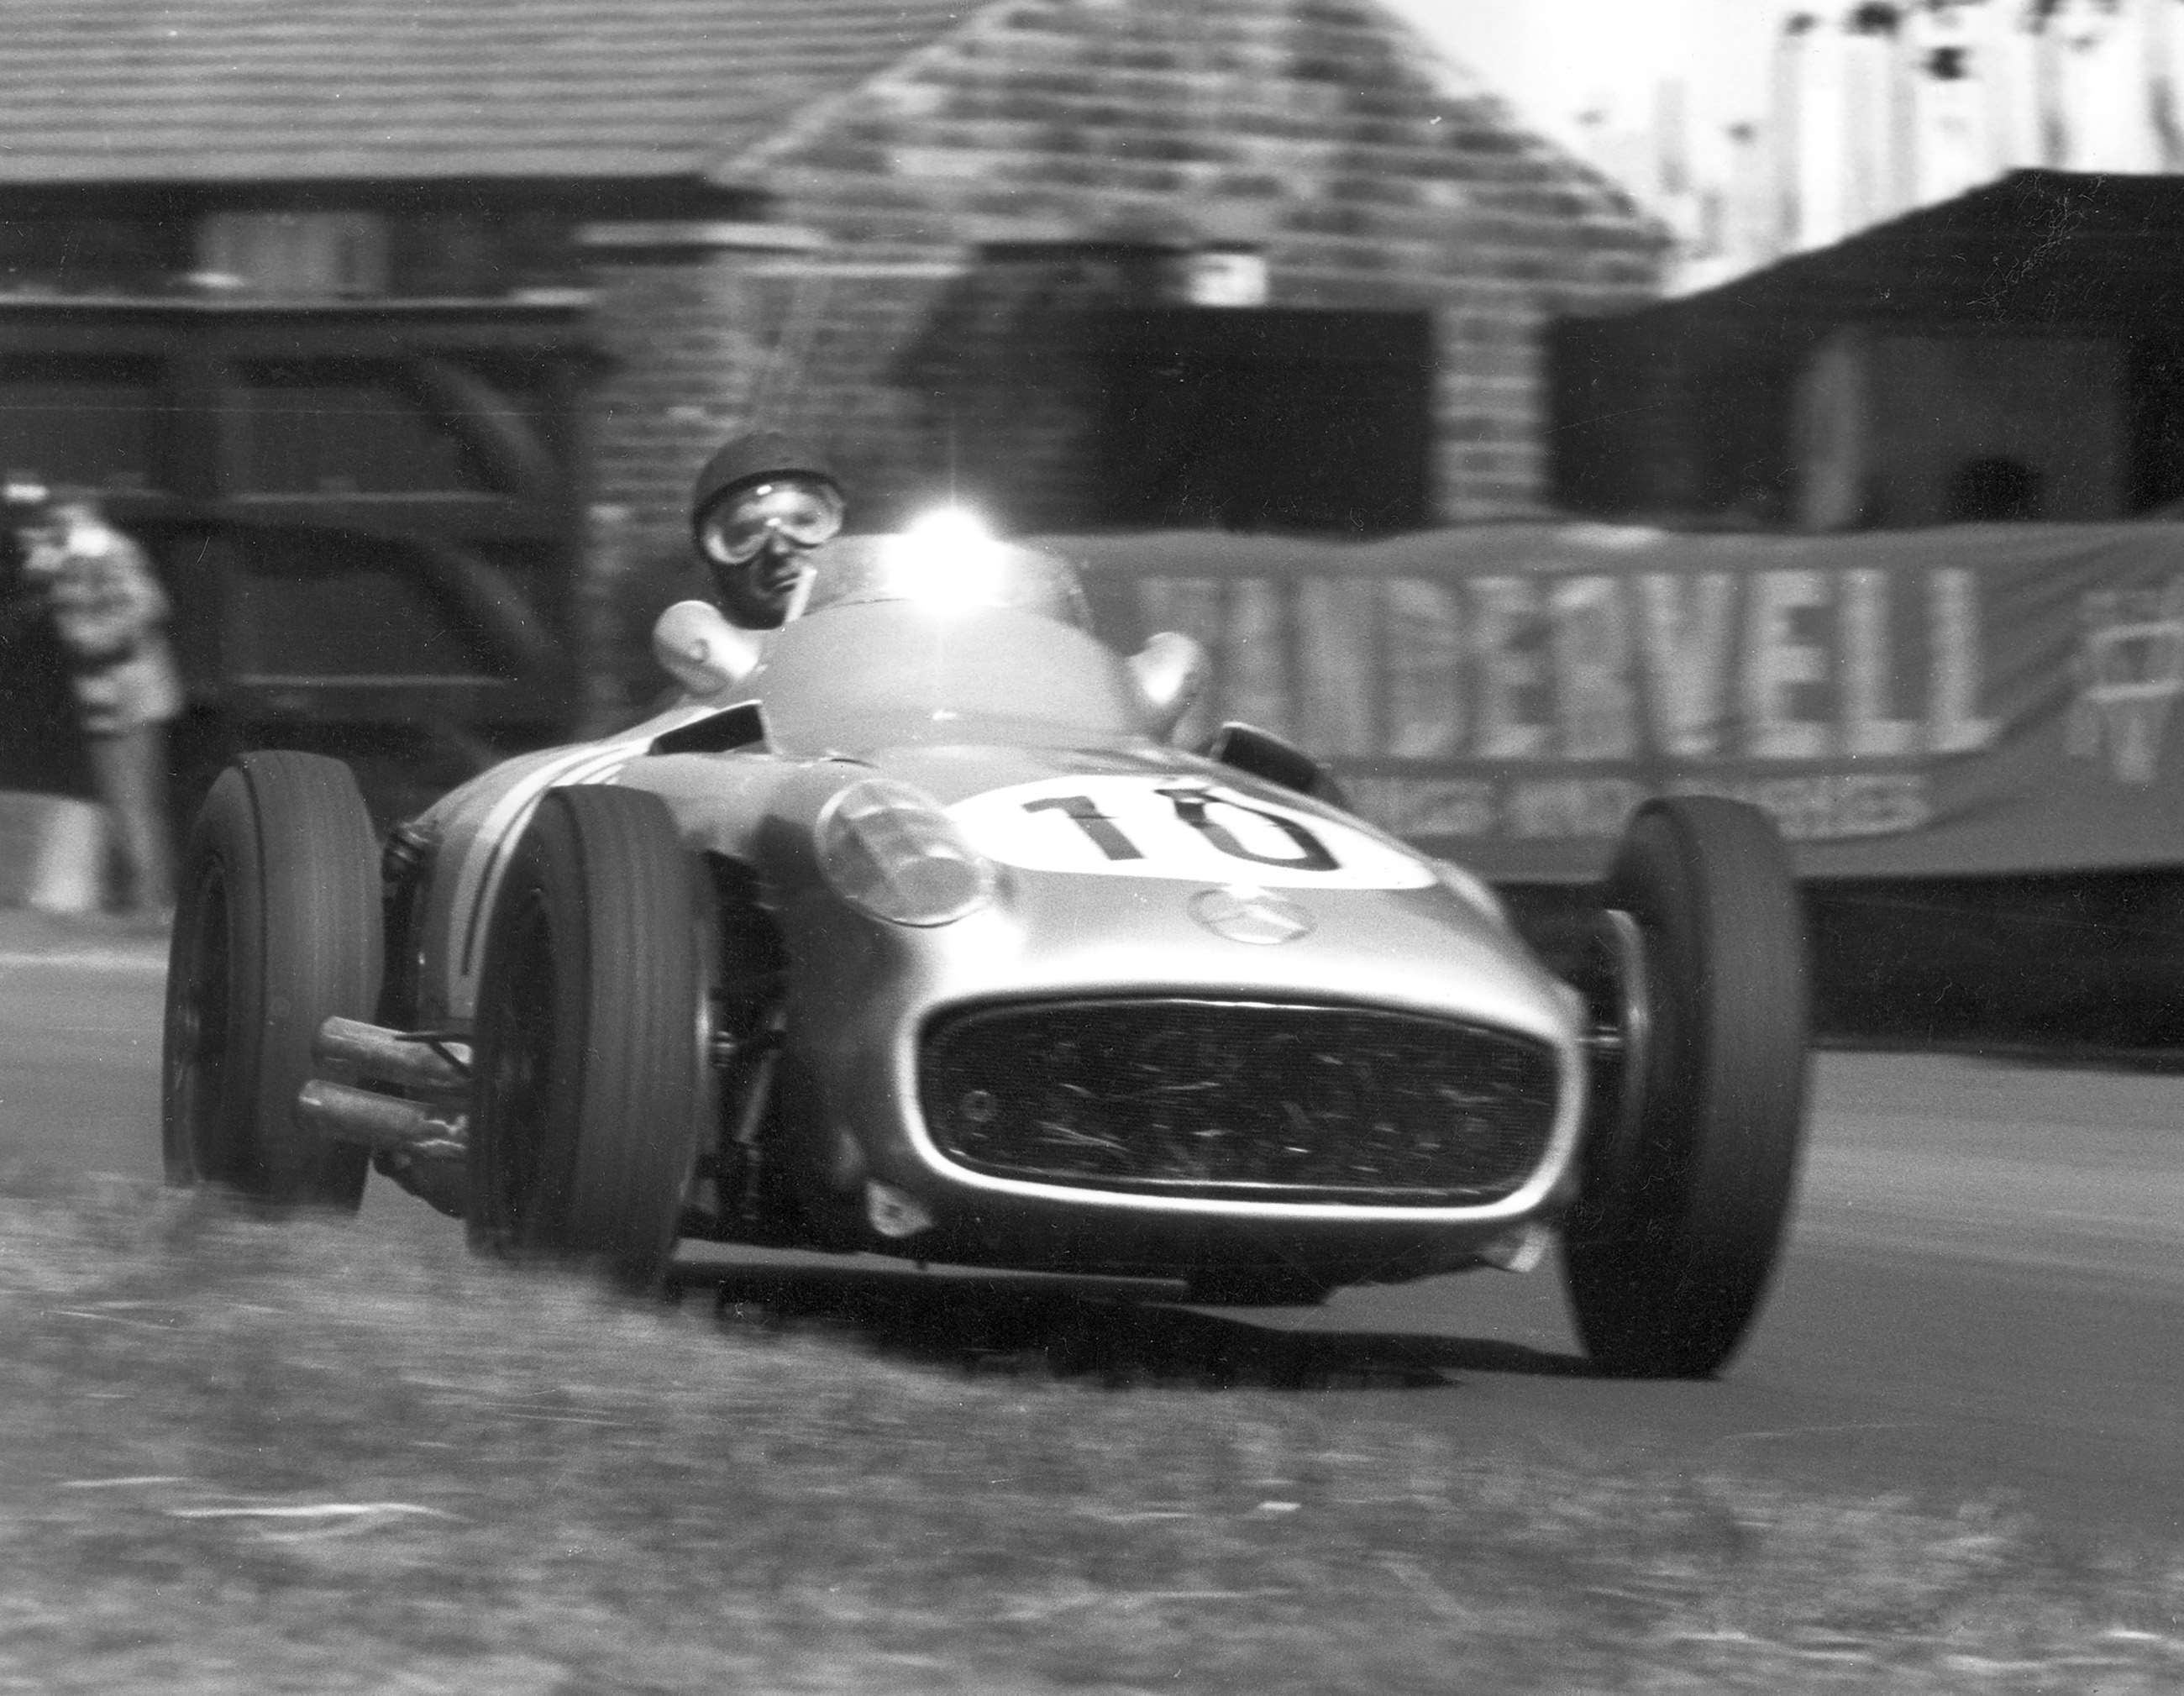 He took his third World Championship title driving solely for Mercedes-Benz in 1955 - here en route to 2nd place (behind team-mate Moss) in the British GP at Aintree; he was truly touched by genius.